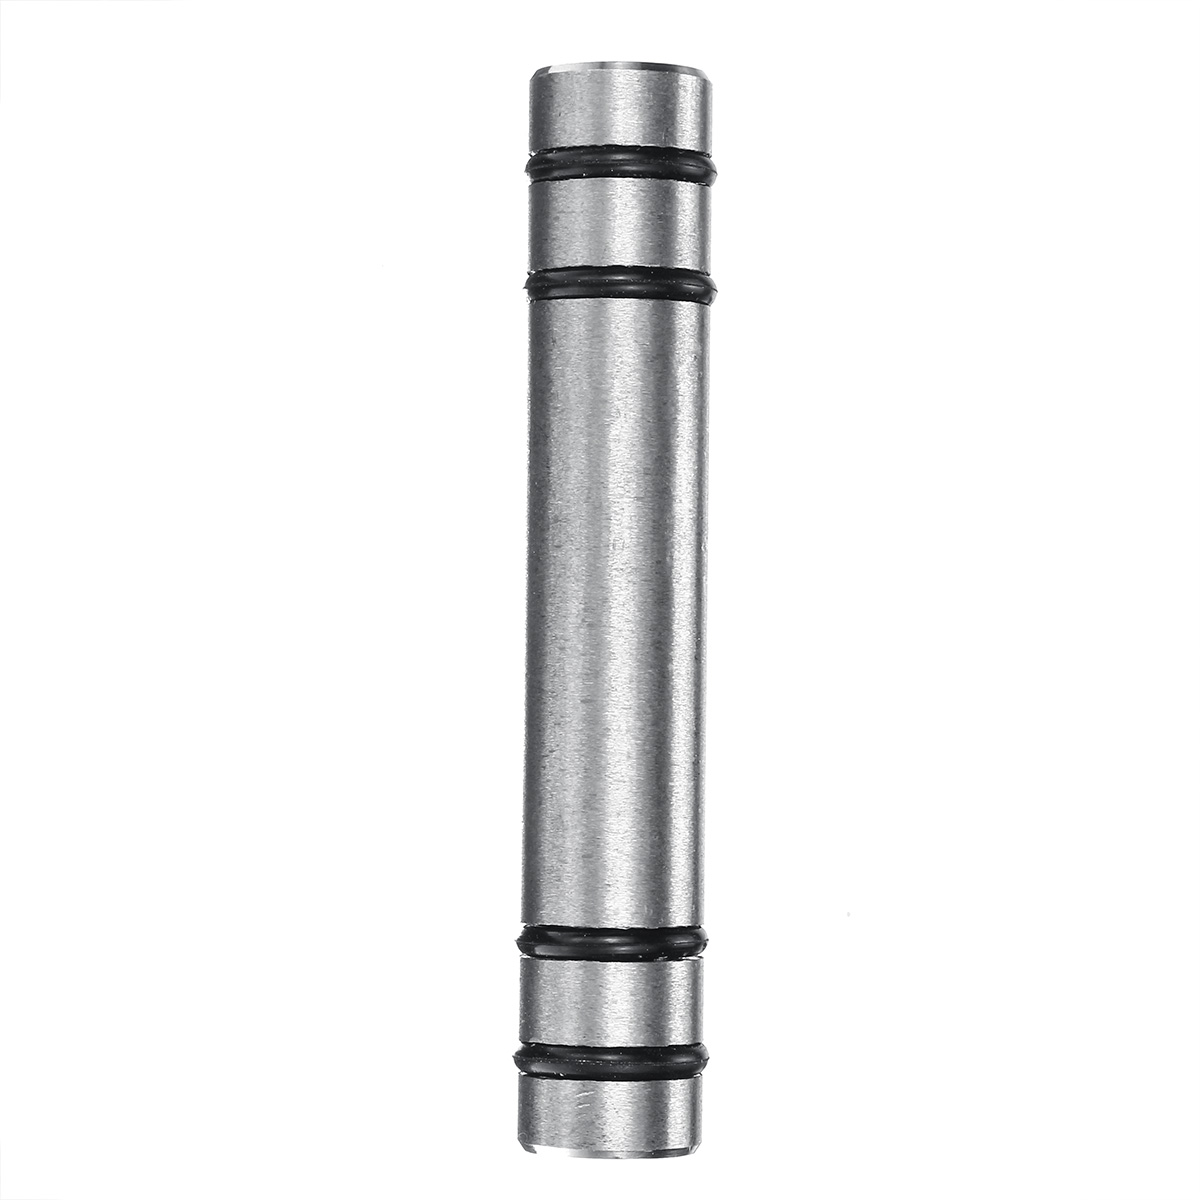 Pressure-Washer-Extension-Lance-Wand-14quot-M22-Quick-Connect-Adapter-Hose-G-un-Fit-1555252-8